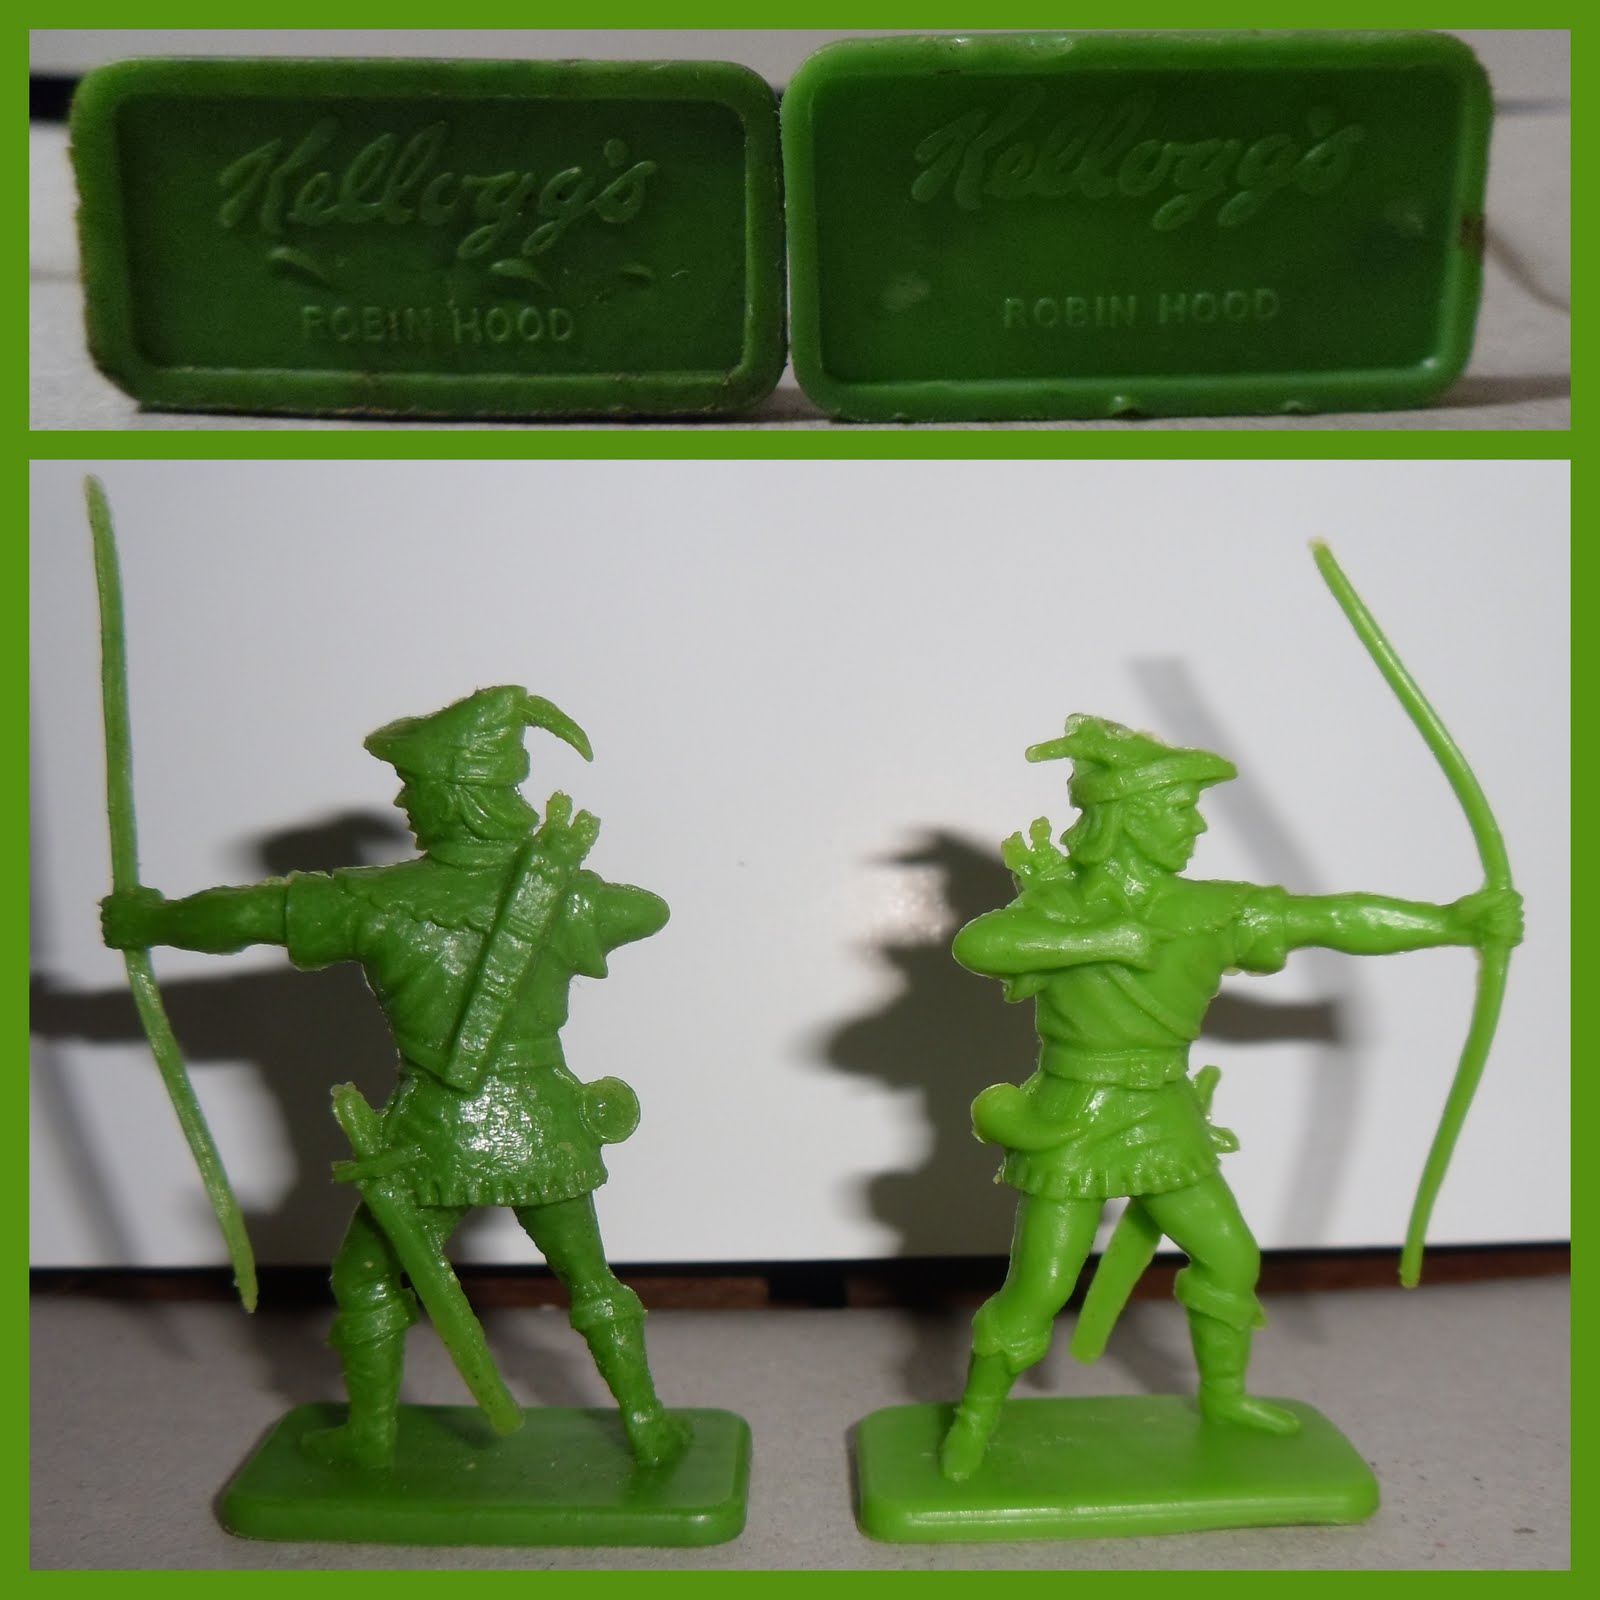 60mm plastic toy soldiers 5 Dulcop Robin Hood Characters and Merry Men 